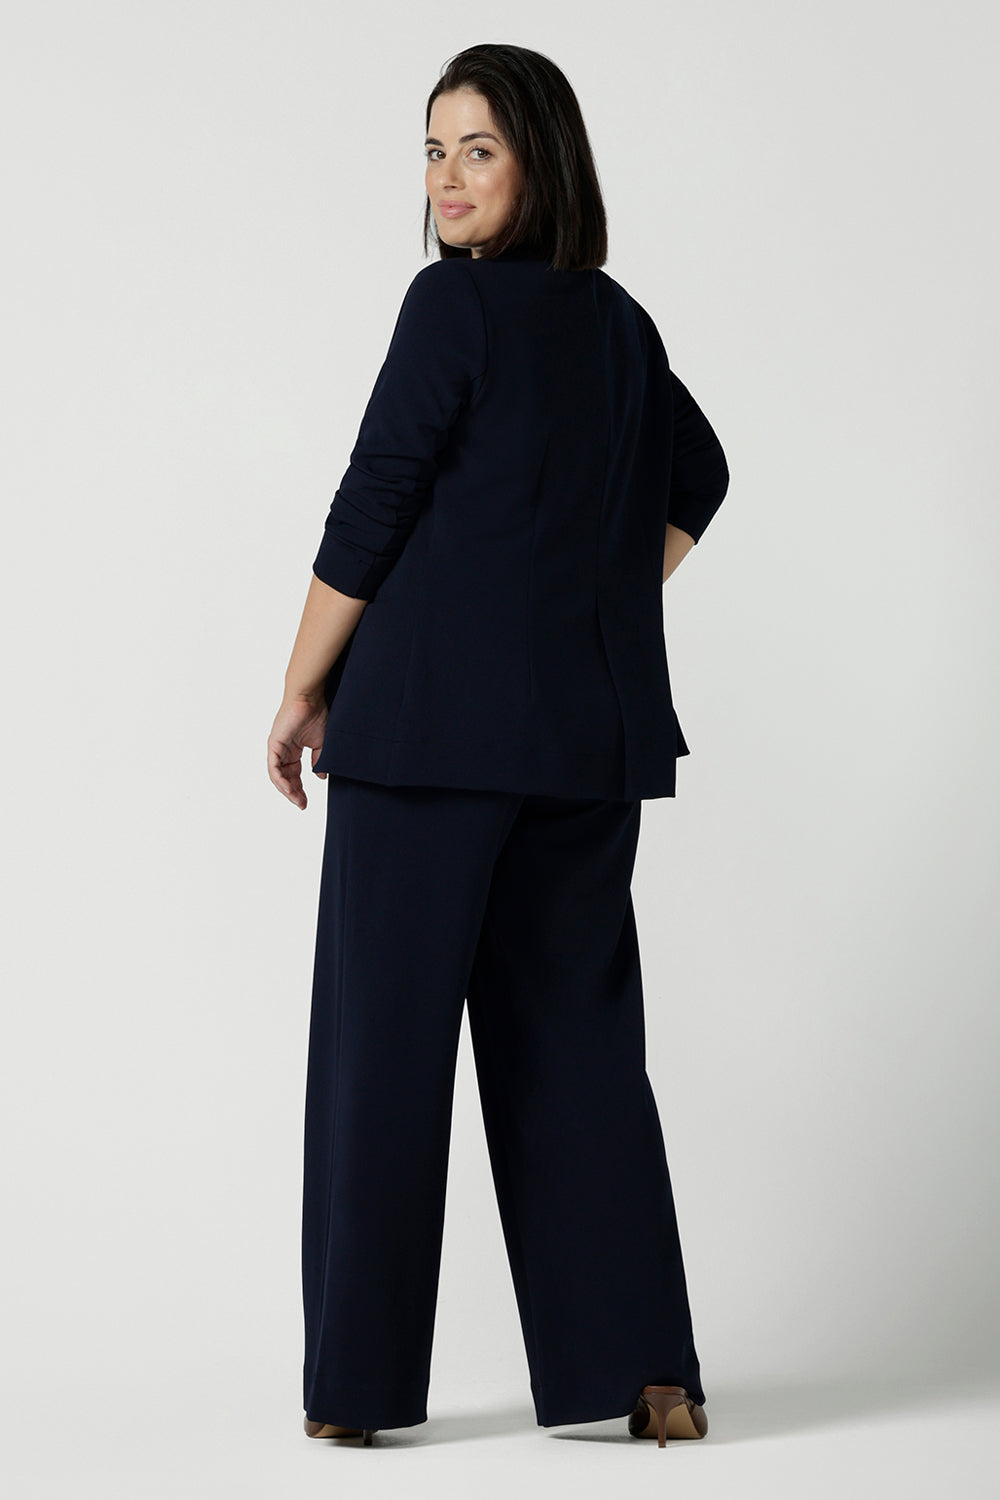 Back view of a size 10 women wearing a Navy Marit blazer with Scuba crepe and collar. It has functional patch pockets and tailored shawl collar. Stylish corporate casual wear for women. Made in Australia size 8 - 24.